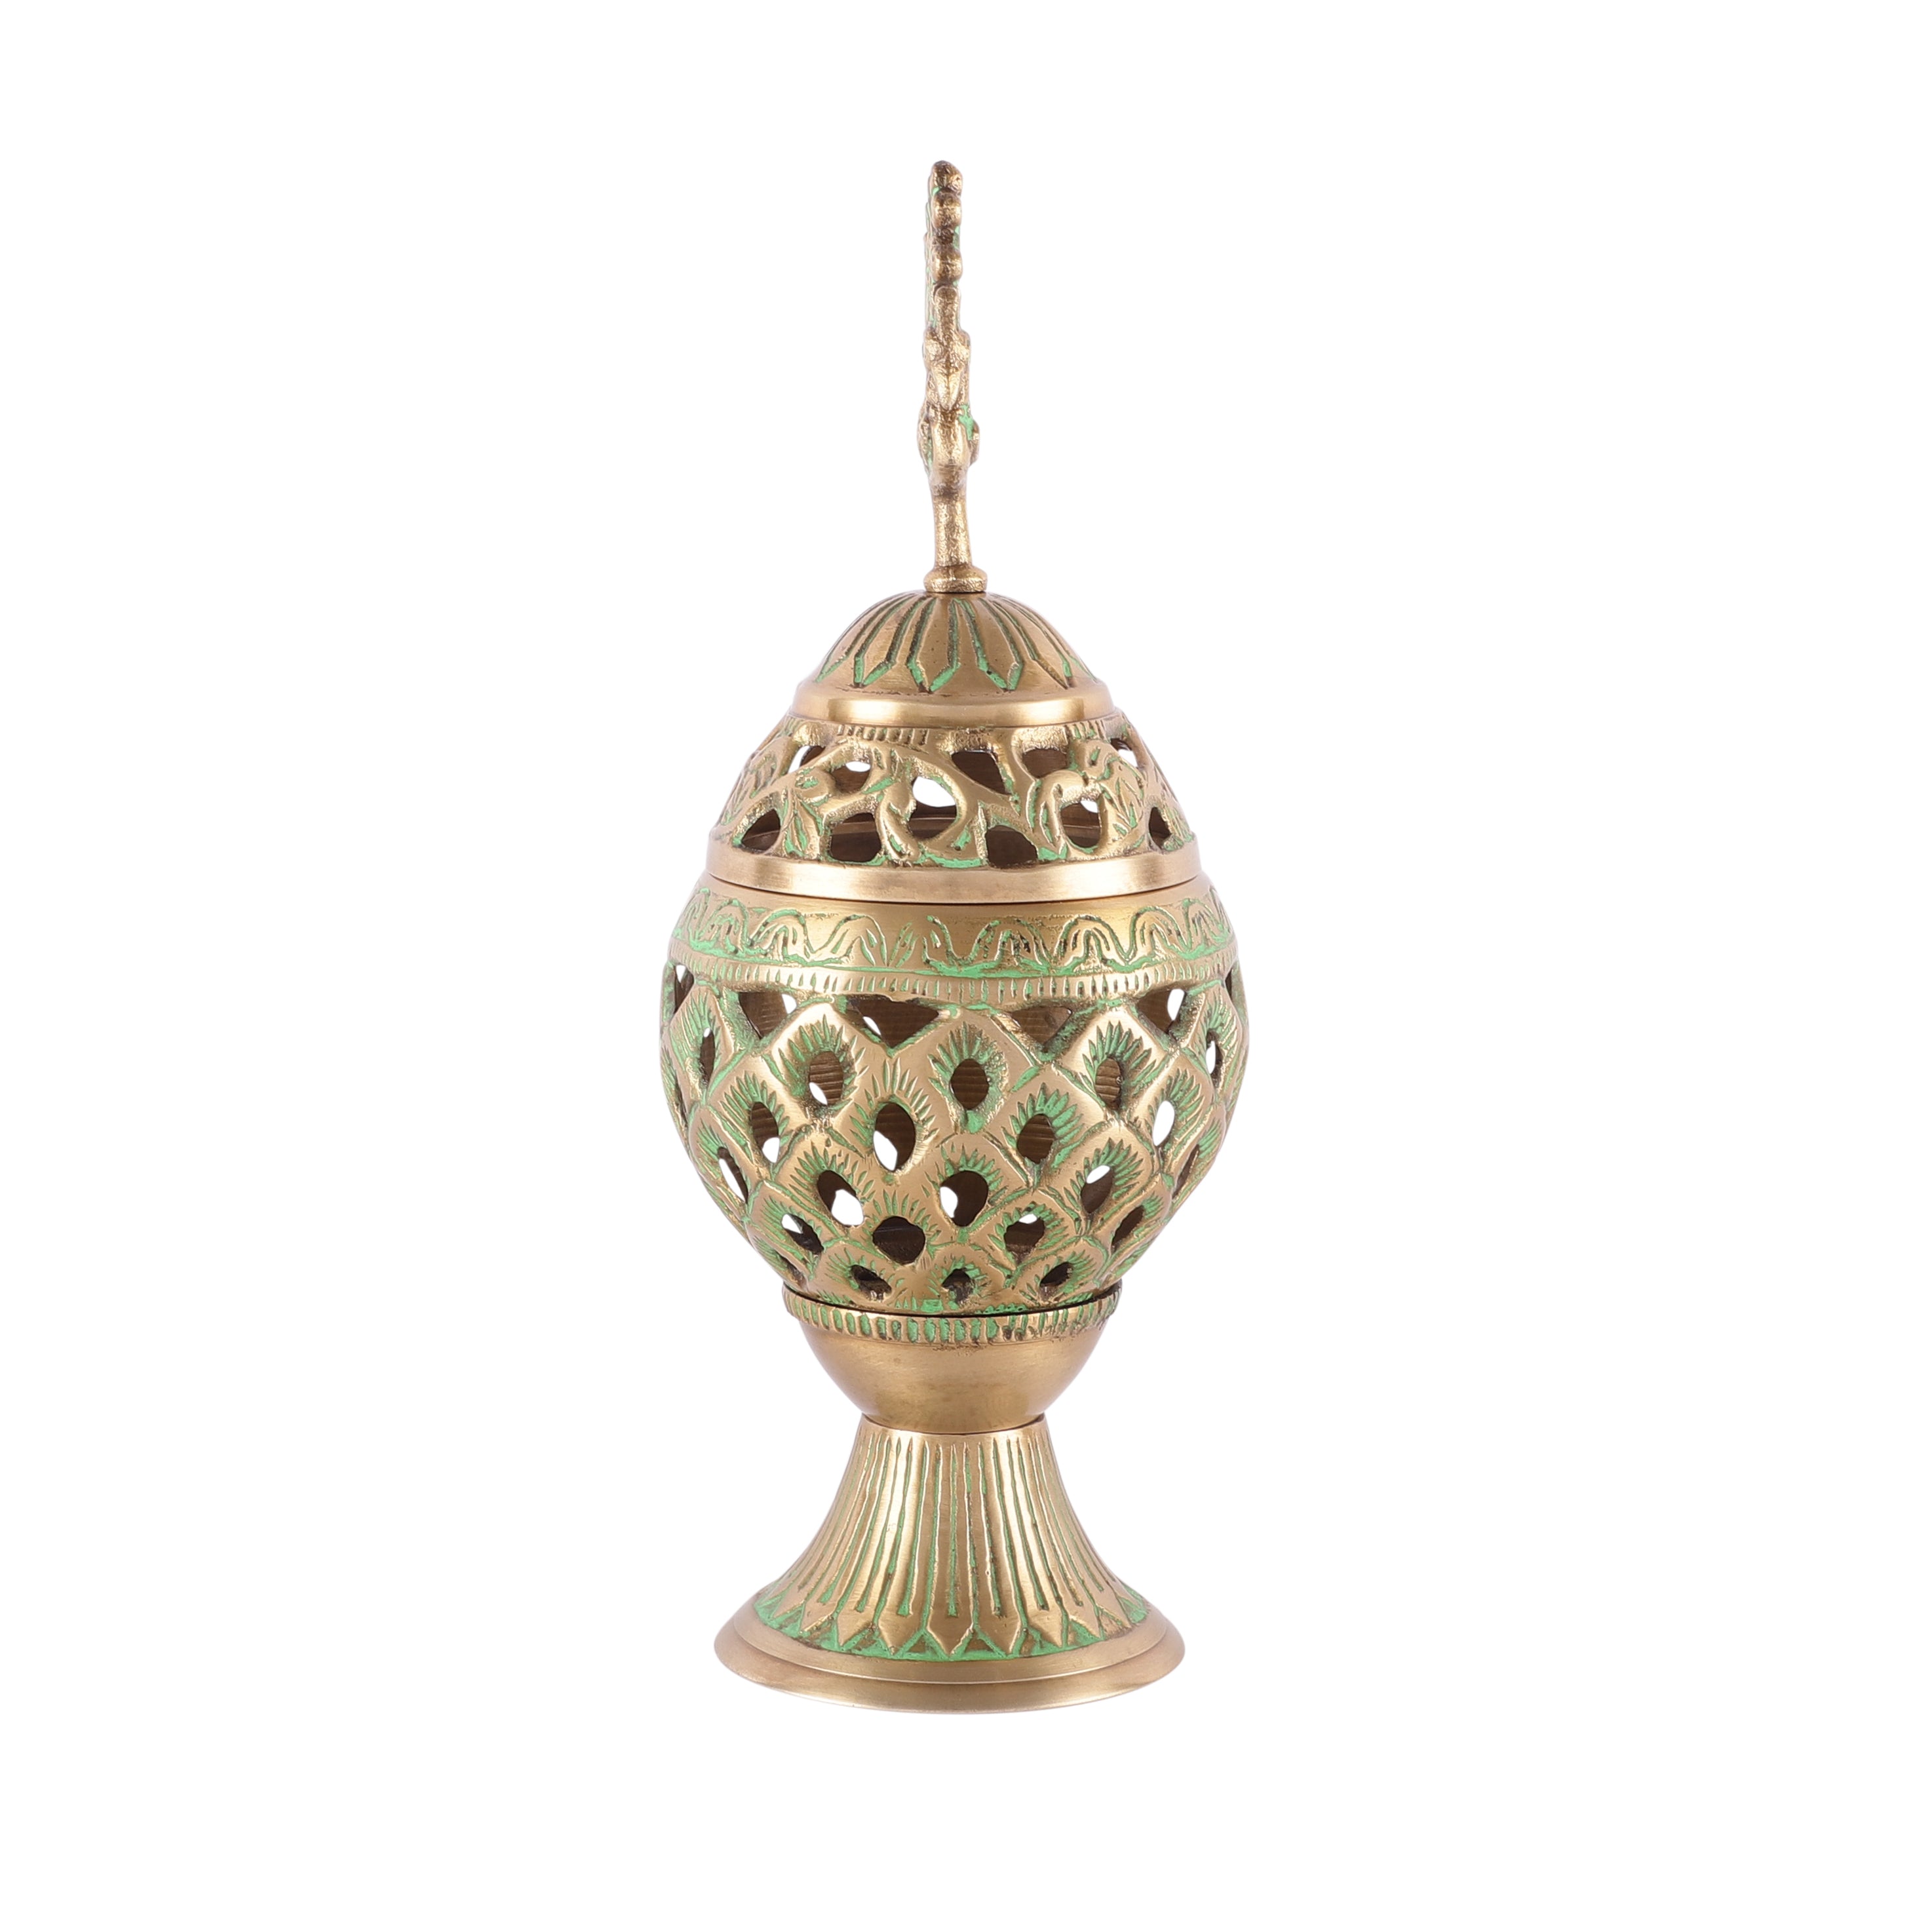 Peacock Dome Incense Holder